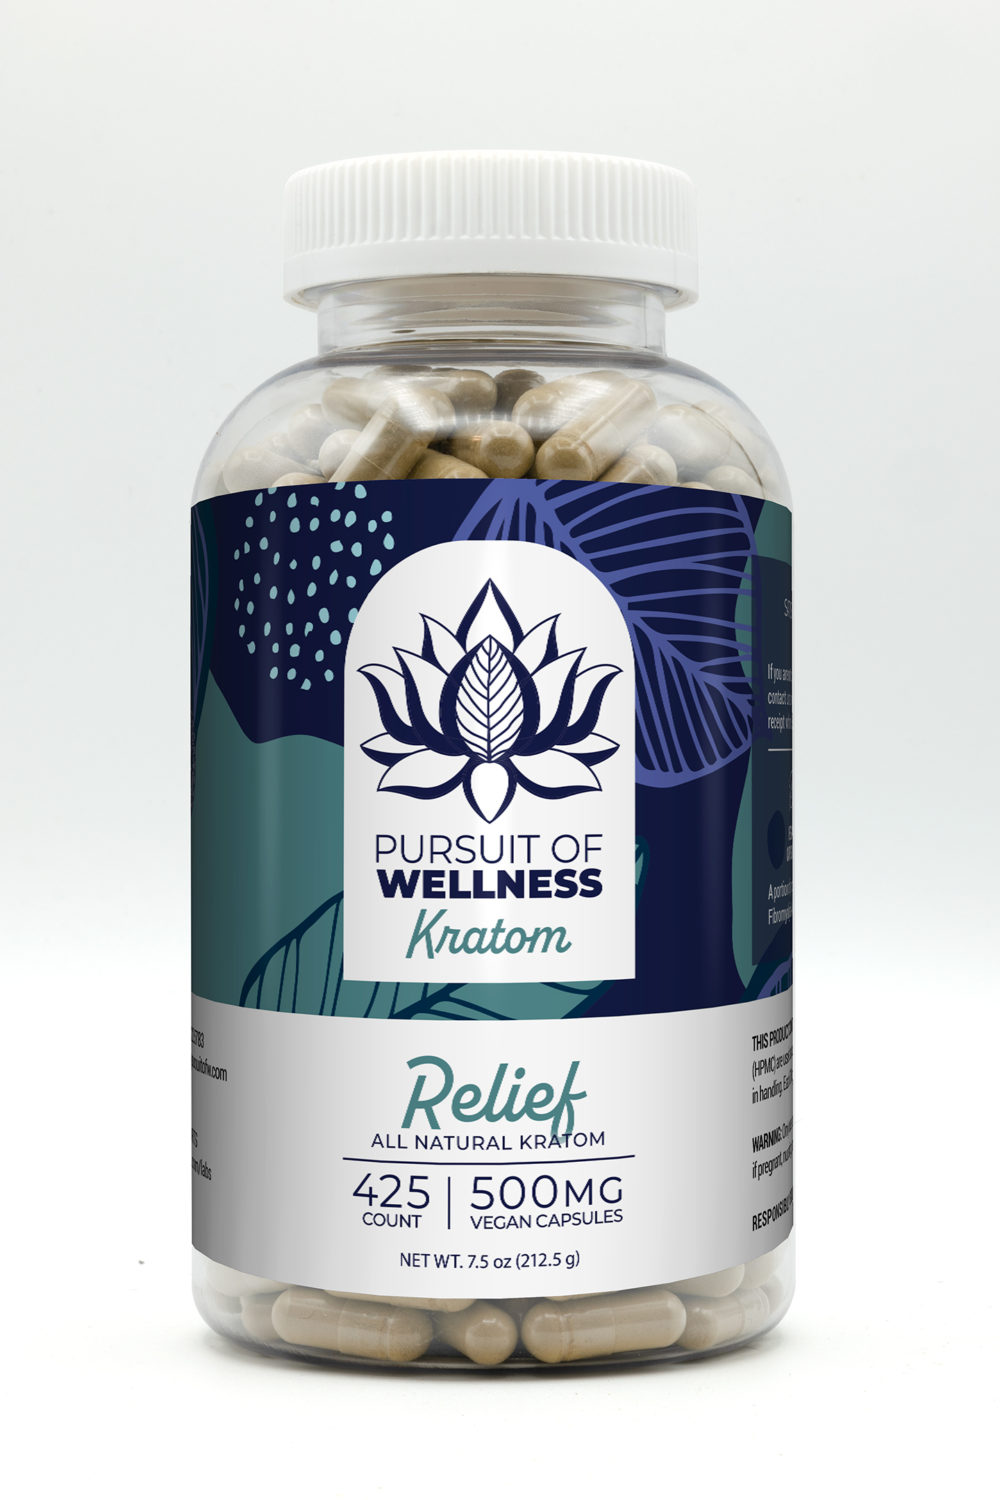 The Best Delta 8 THC Products for Managing PTSD and Trauma Symptoms